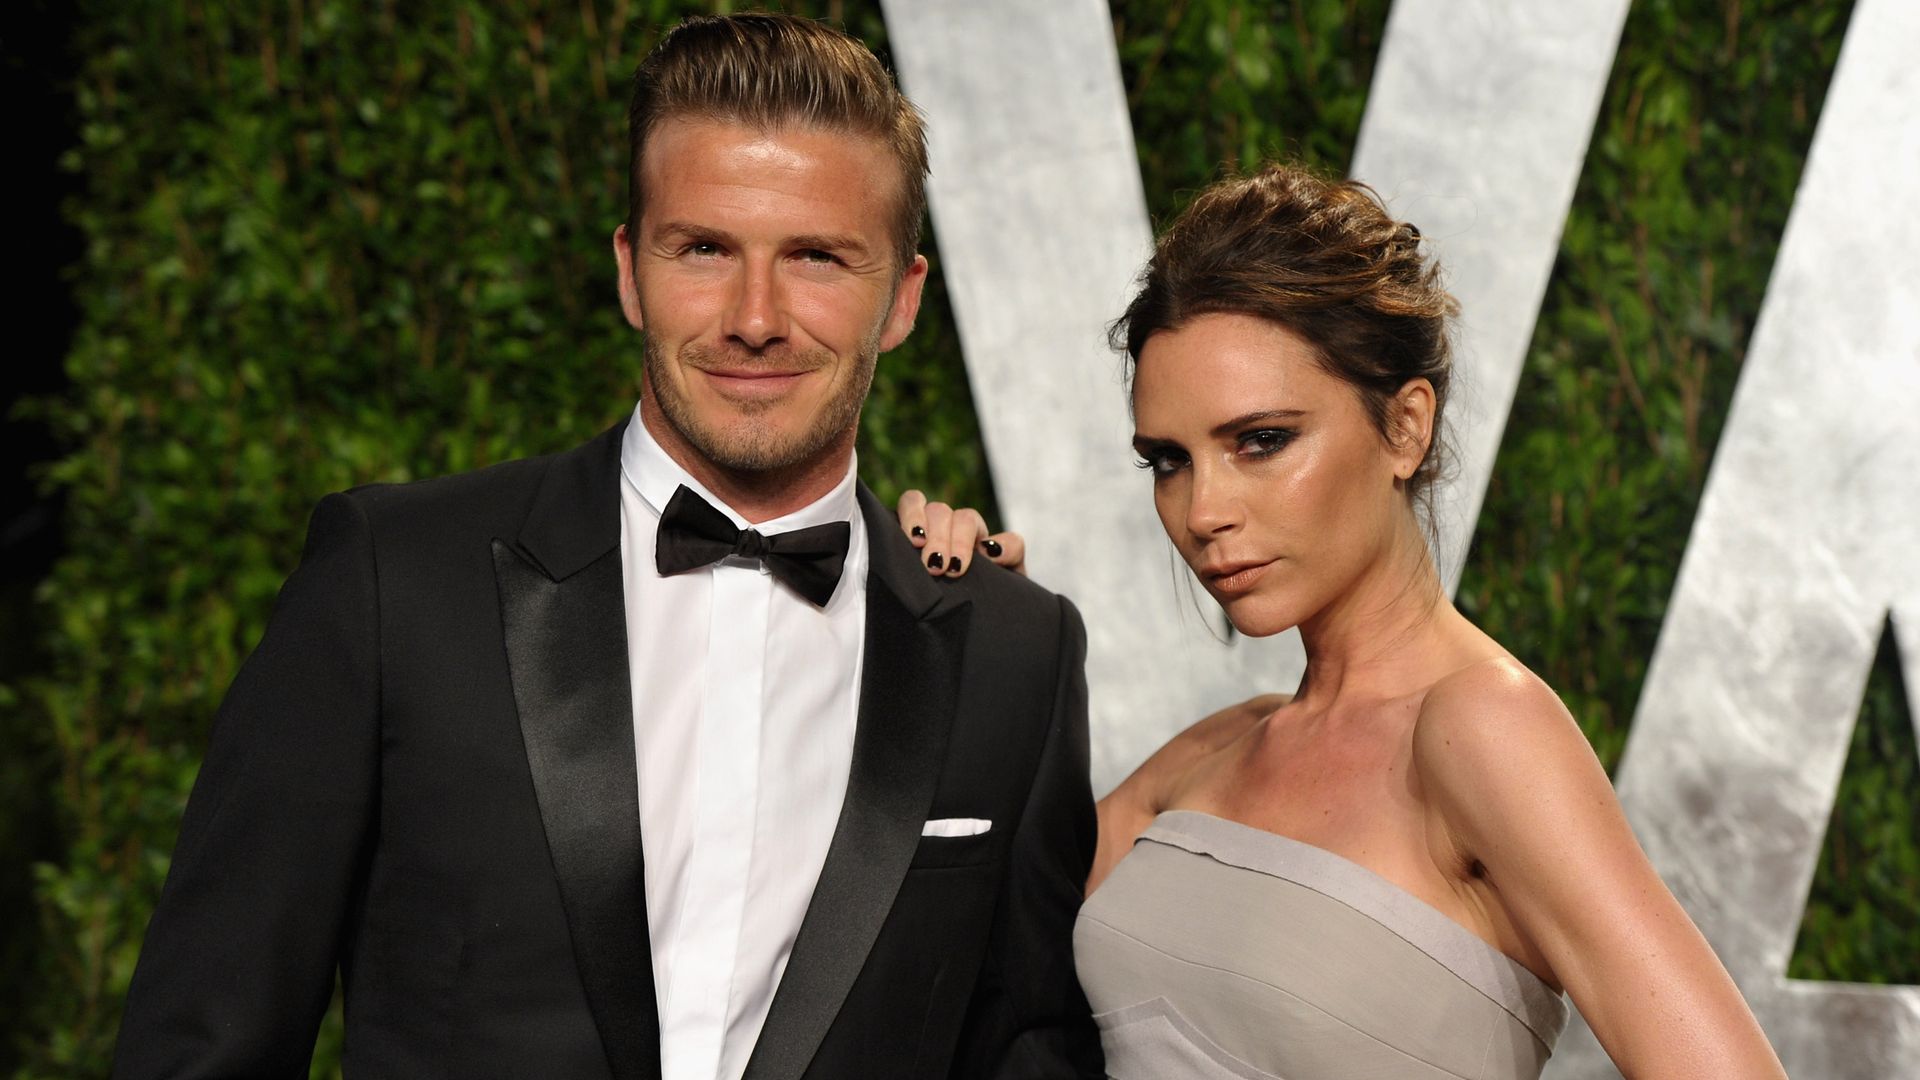 Athlete David Beckham and fashion designer Victoria Beckham arrive at the 2012 Vanity Fair Oscar Party hosted by Graydon Carter at Sunset Tower on February 26, 2012 in West Hollywood, California